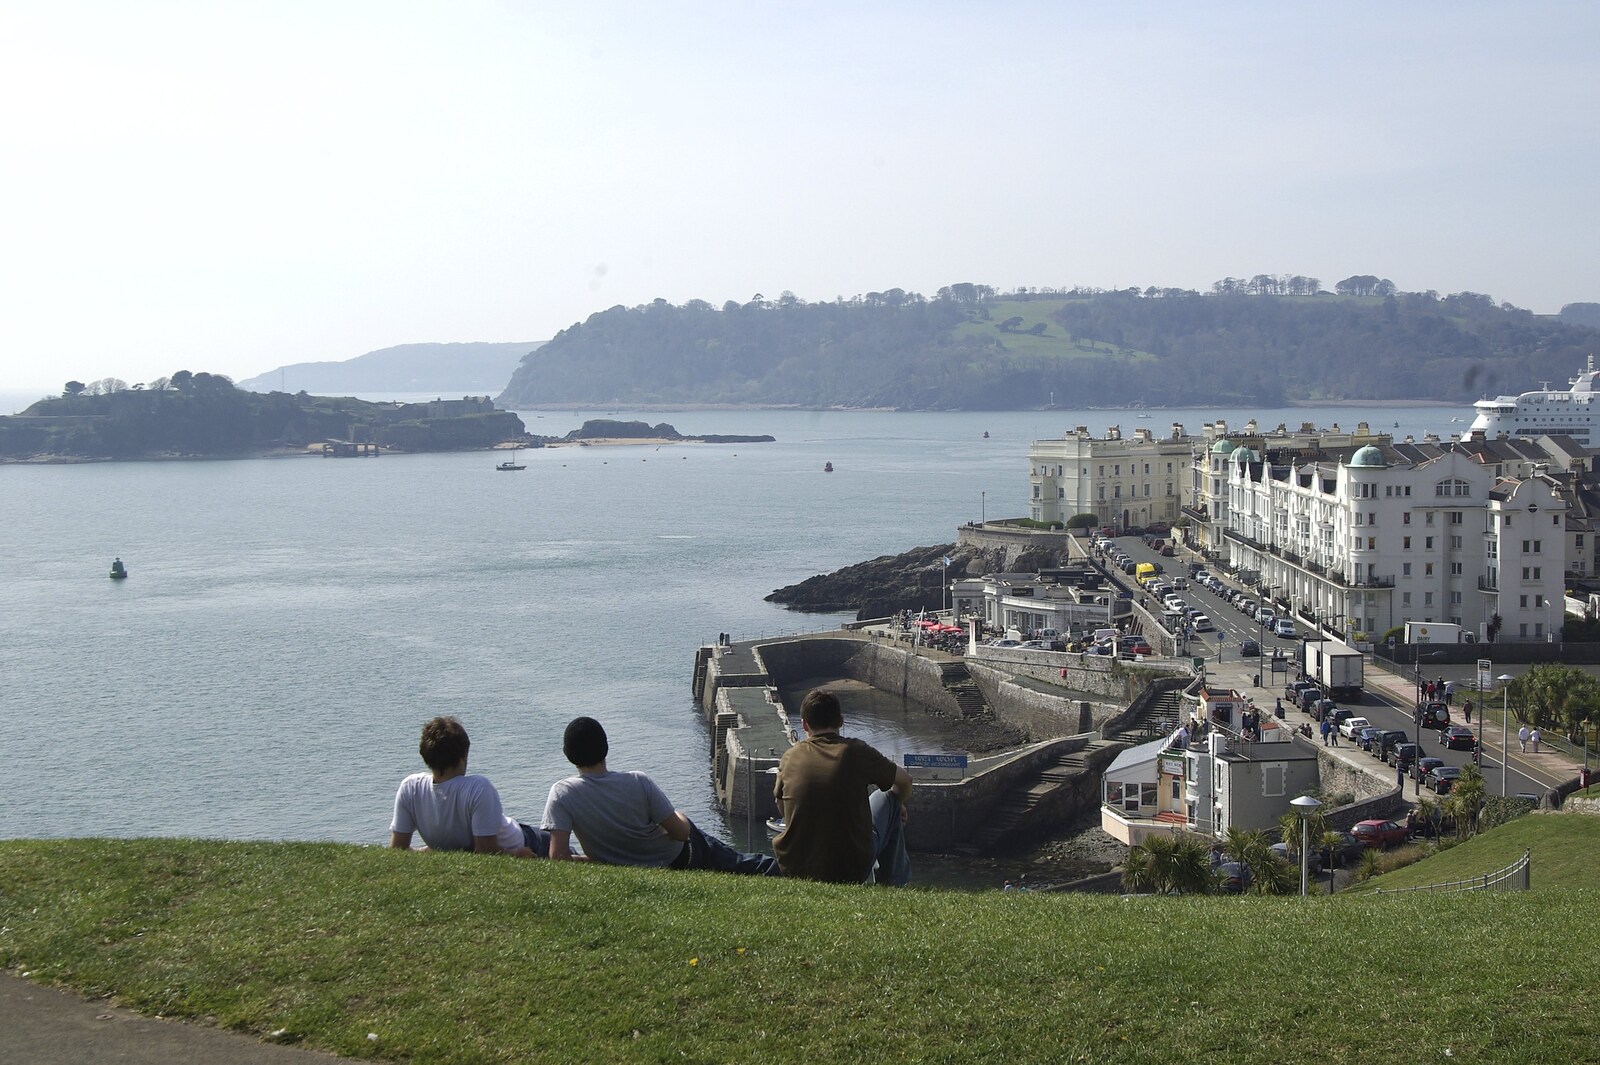 A view over West Hoe from A Trip to The Barbican, Plymouth, Devon - 6th April 2007